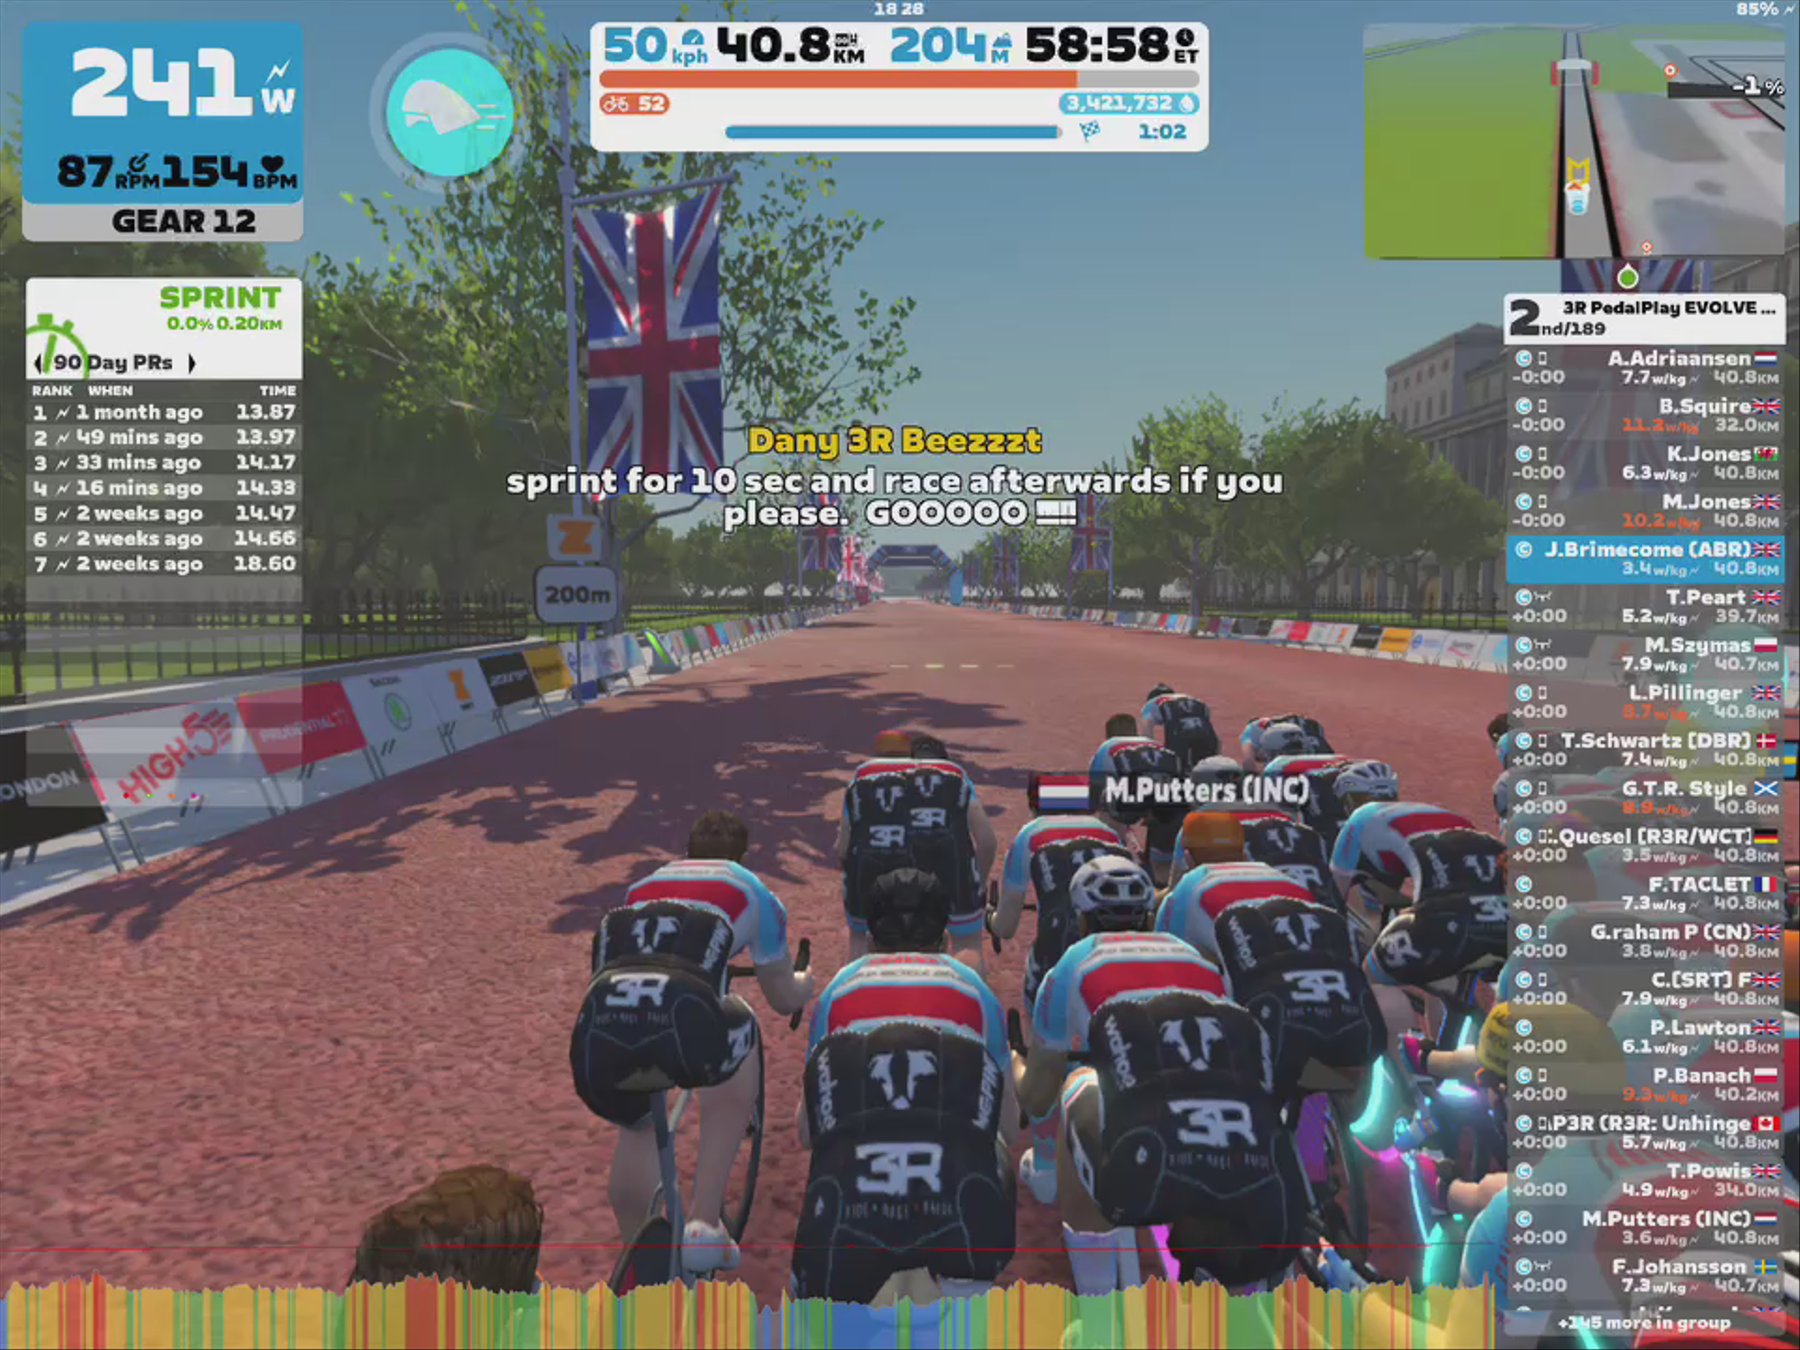 Zwift - Group Ride: 3R PedalPlay EVOLVE Interval Ride [~2.9-3.2 w/kg avg] (C) on Greater London Flat in London